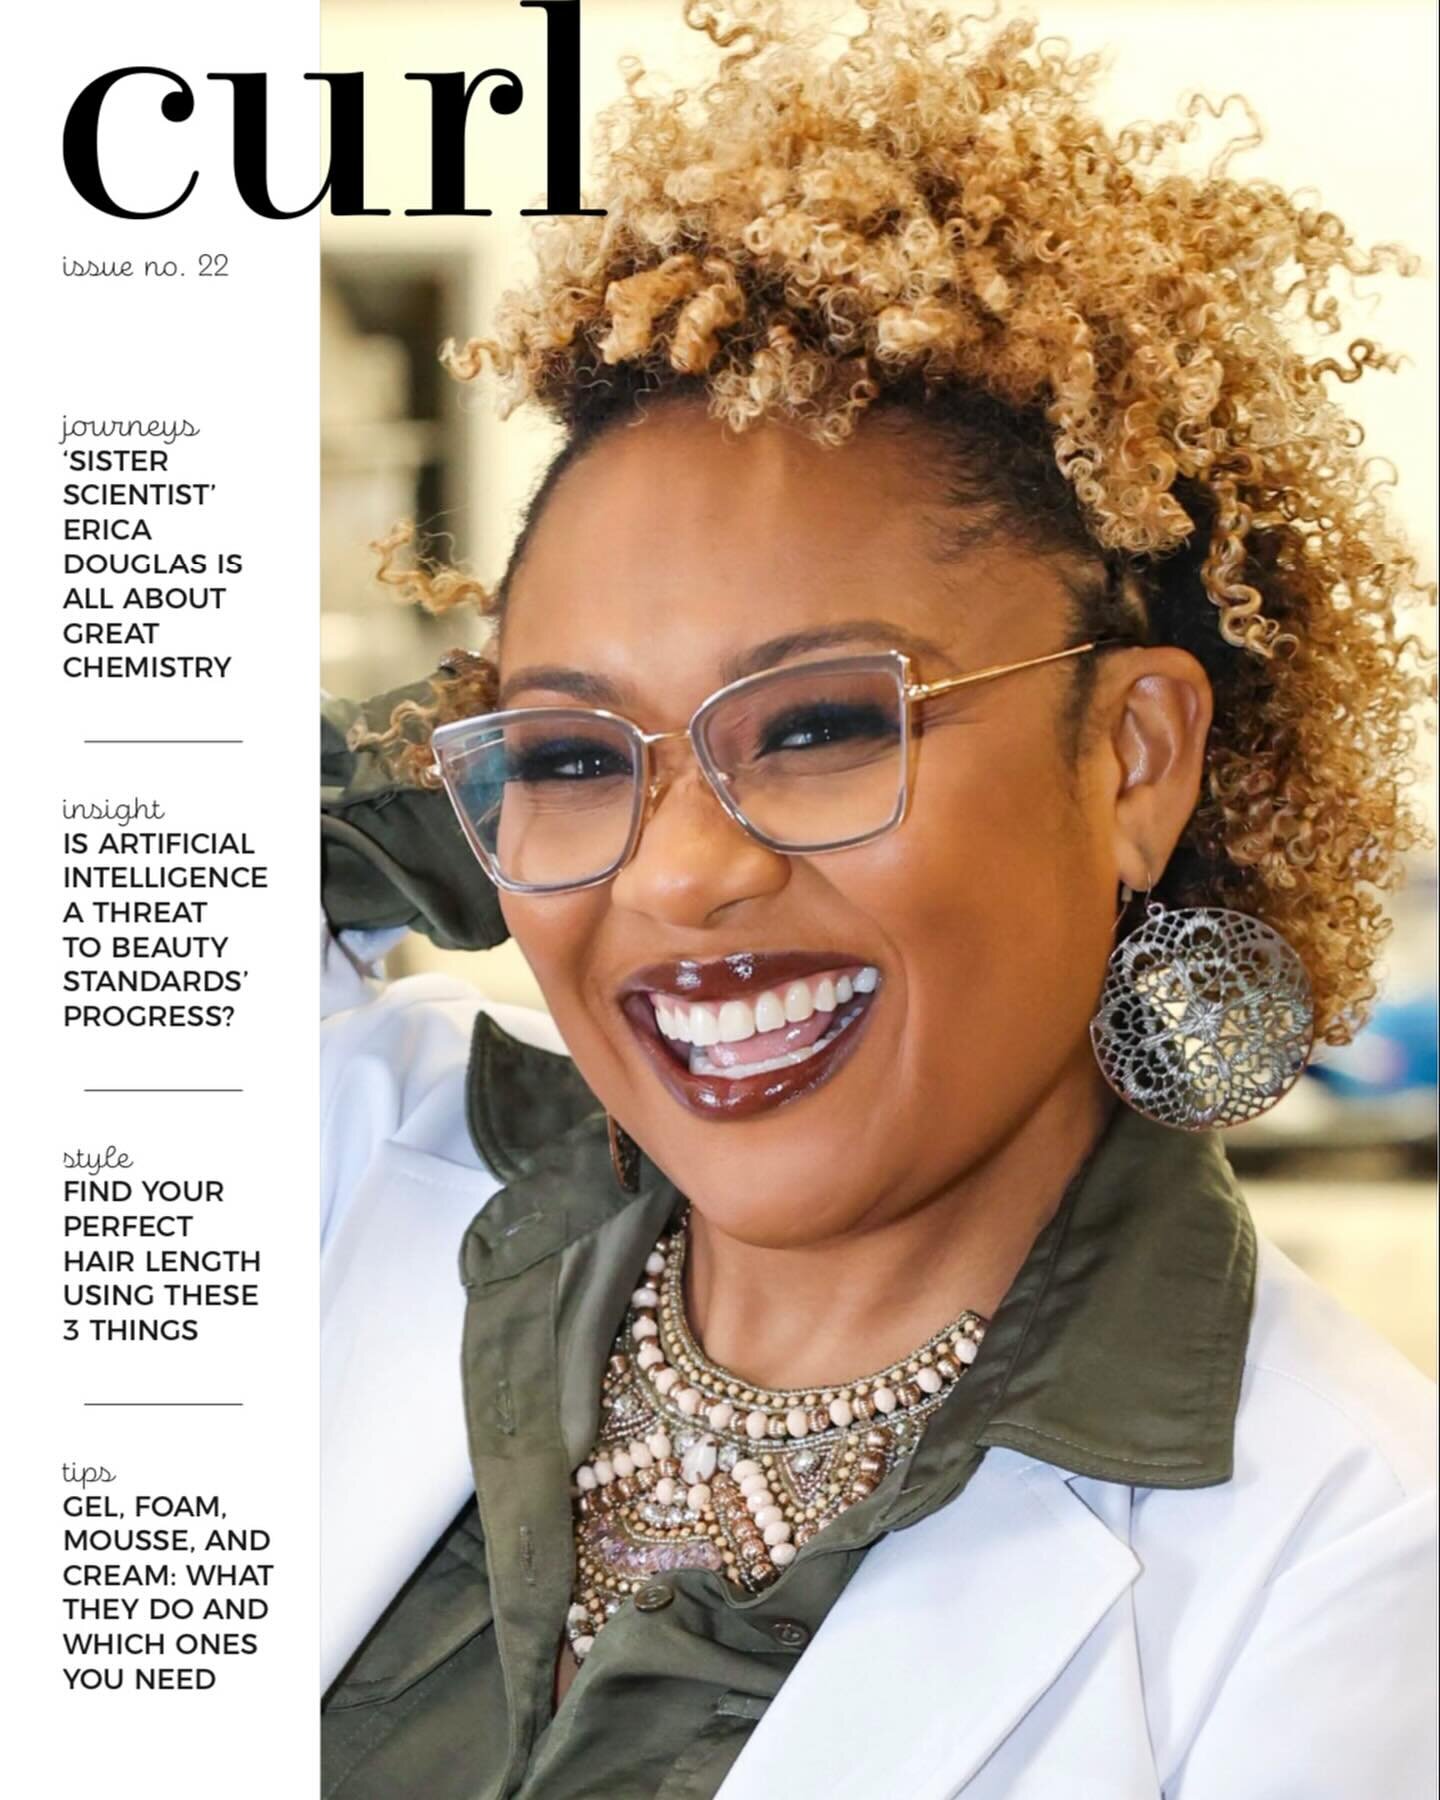 Exciting News! 🎉 

I&rsquo;m thrilled to share that not only have I been featured in Curl magazine, but I&rsquo;m also on the cover! So I can officially add Cover Girl to my LinkedIn page now. 😁

From a young chemist in the lab to CEO of a thriving